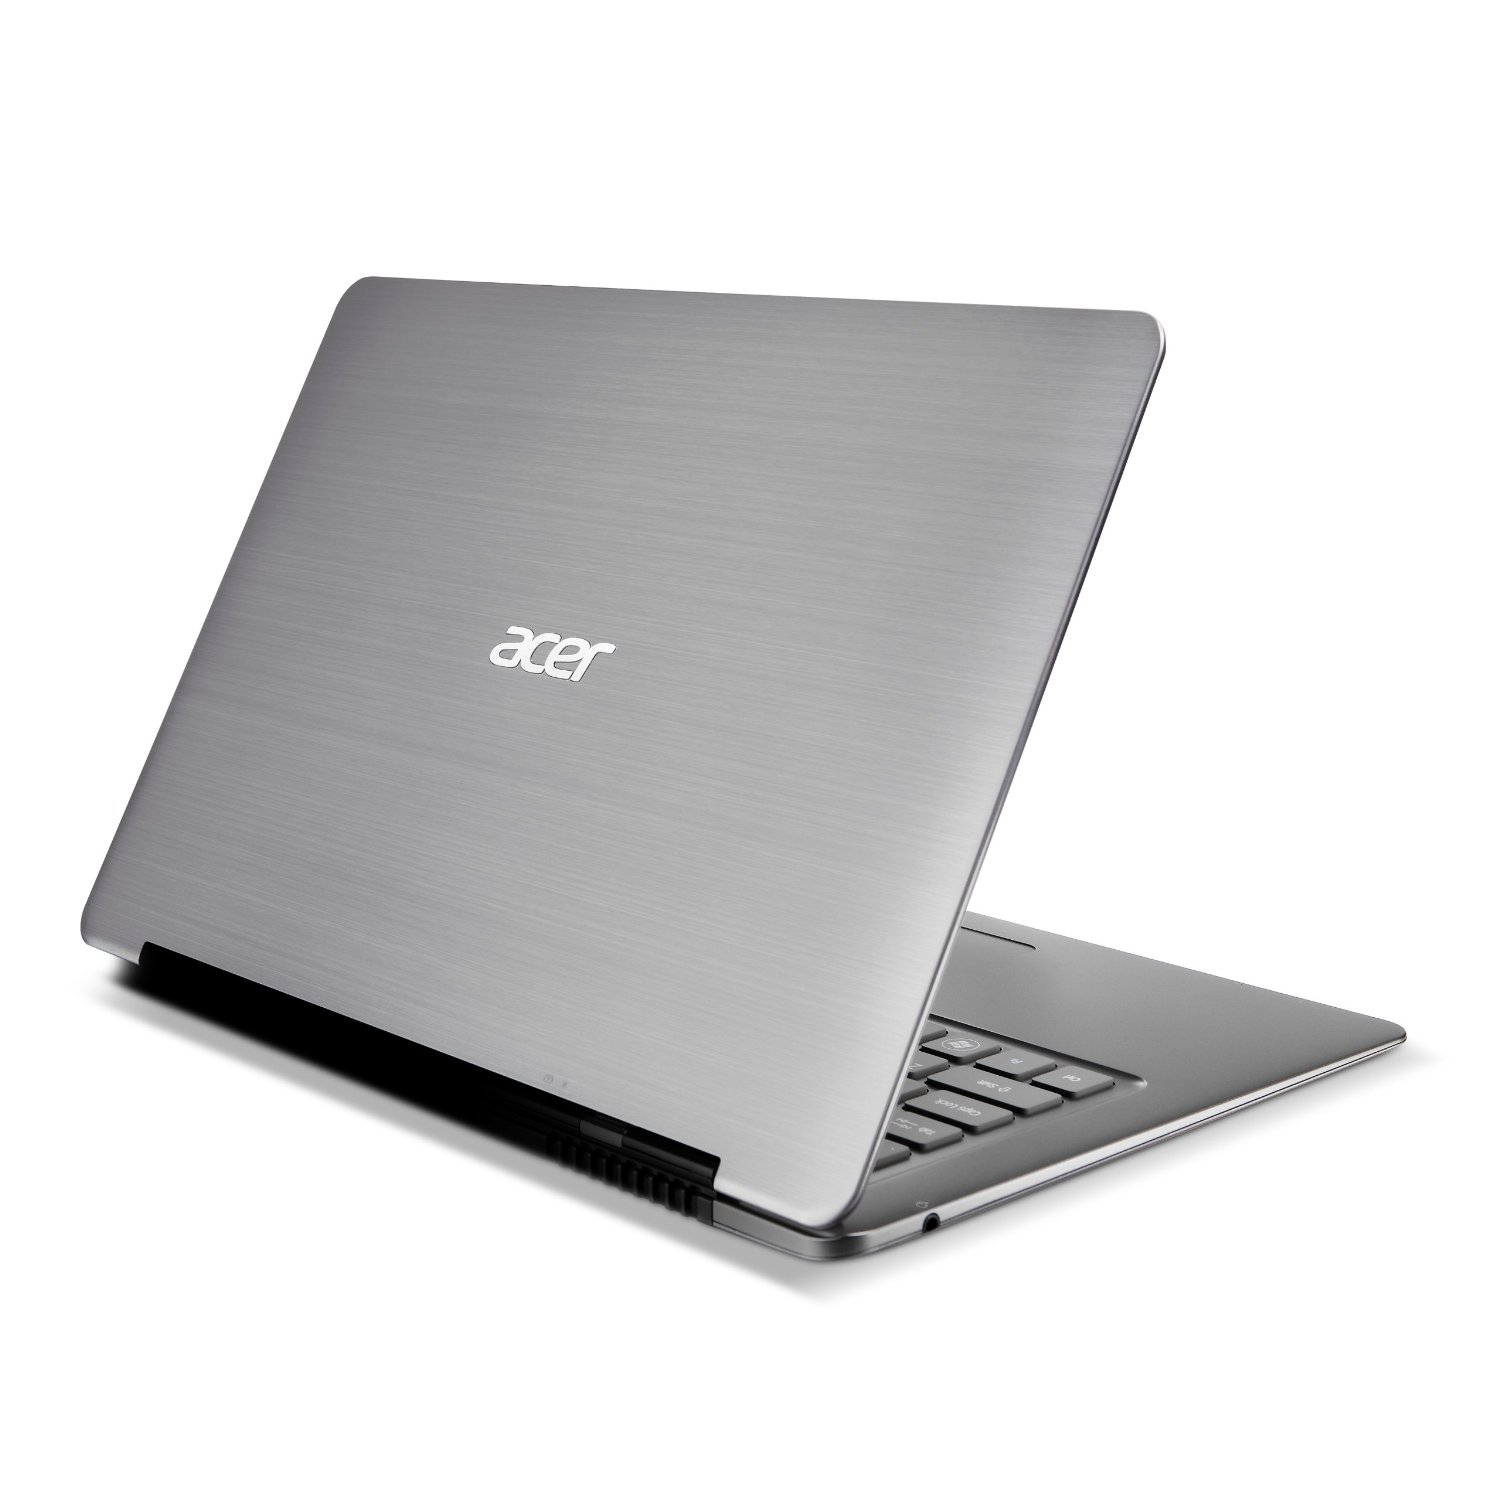 http://thetechjournal.com/wp-content/uploads/images/1204/1335733207-acers-new-aspire-s3-133inch-hd-display-ultrabook-6.jpg